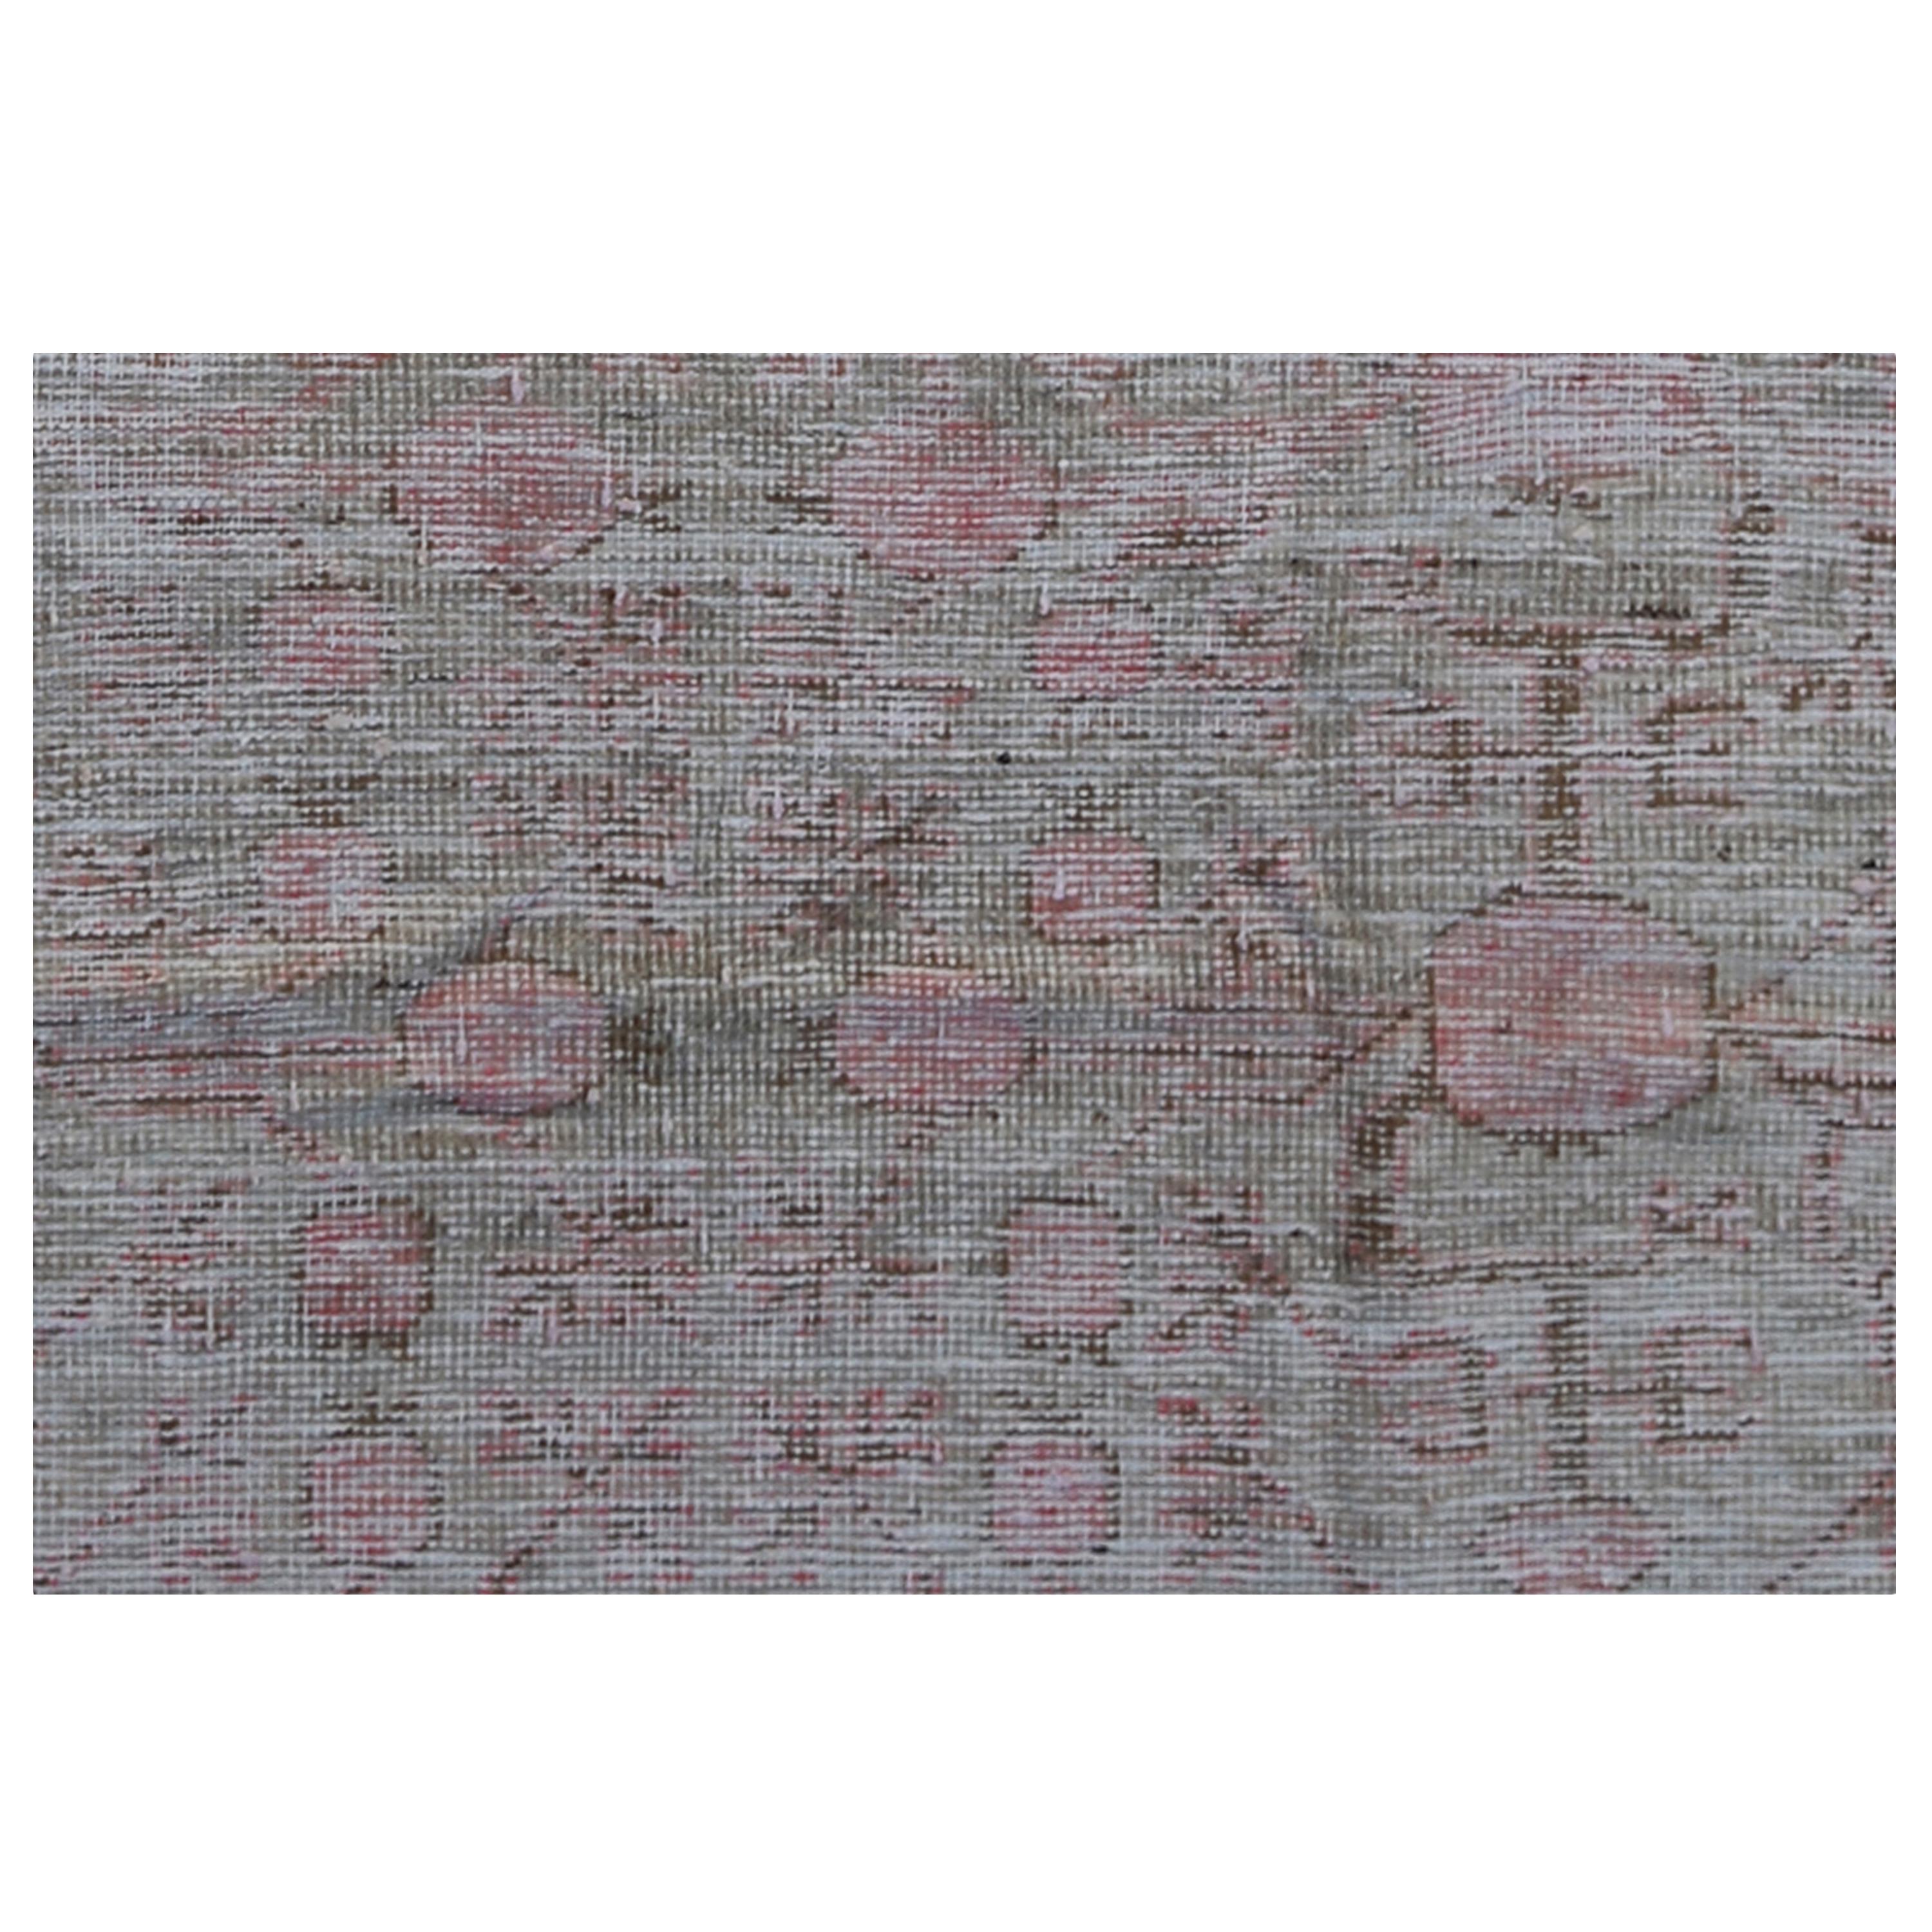 Sourced from the ancient Silk Road to bring a genuine one-of-a-kind rug to your home, this Multicolored Vintage Wool Cotton Blend Rug - 4' x 7'2